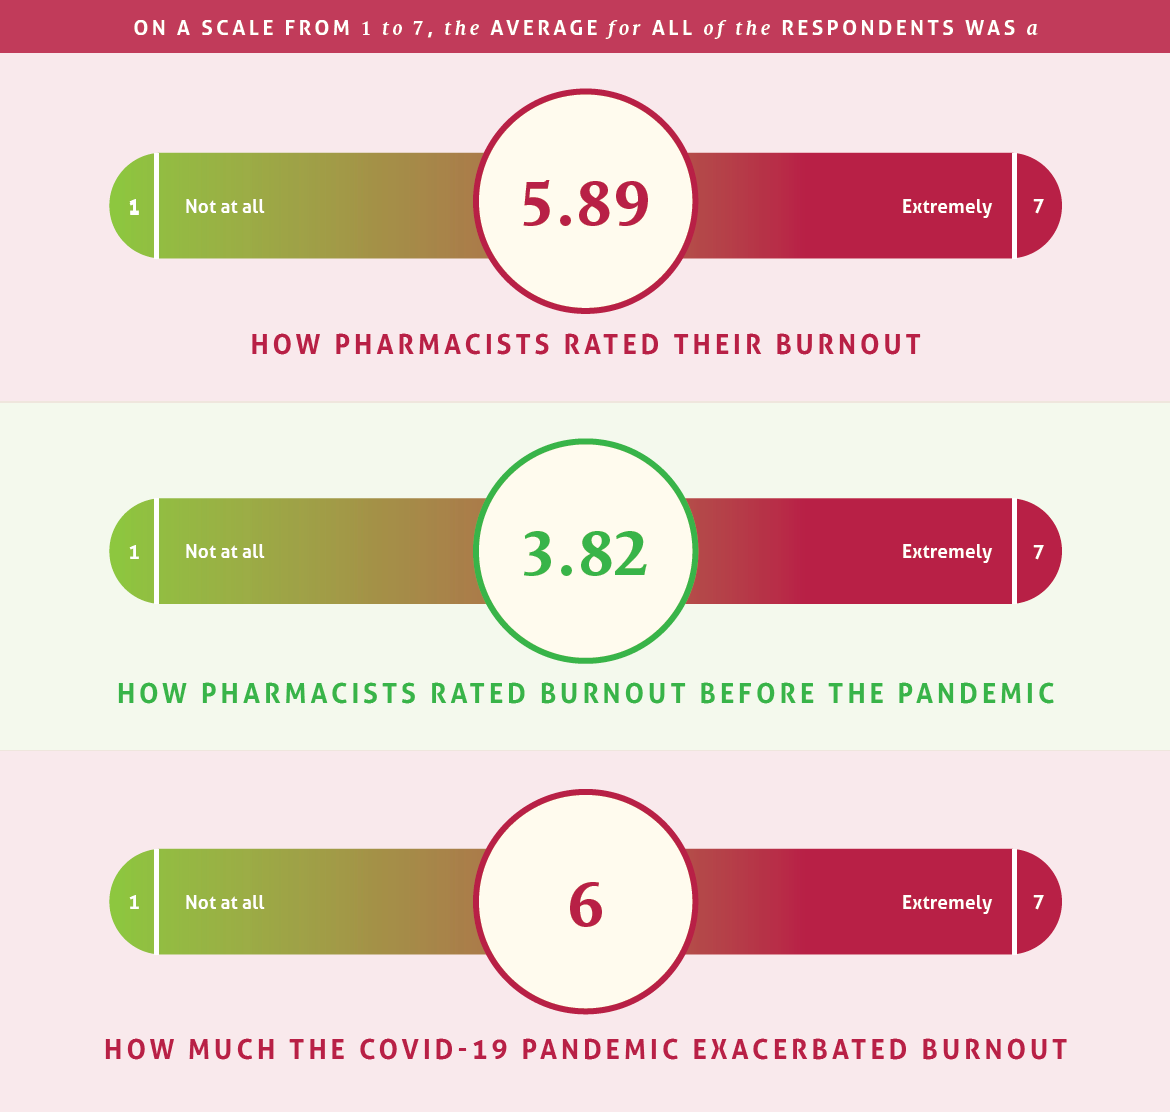 How Pharmacists Rated Their Burnout